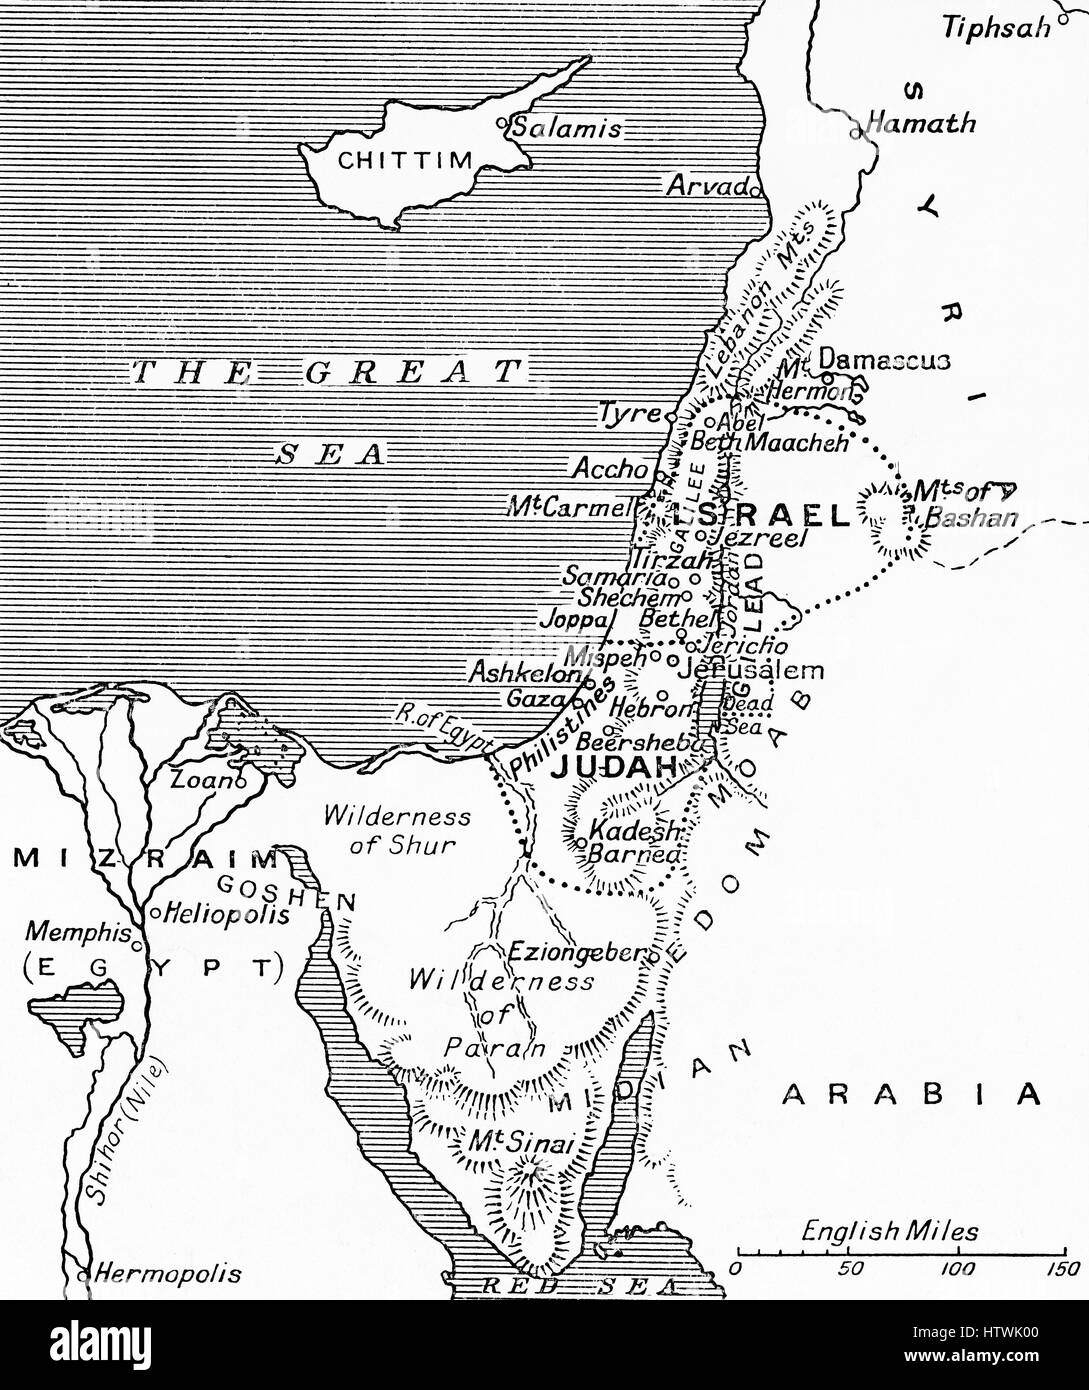 Map showing the kingdoms of Judah and Israel. From Hutchinson's History of the Nations, published 1915. Stock Photo